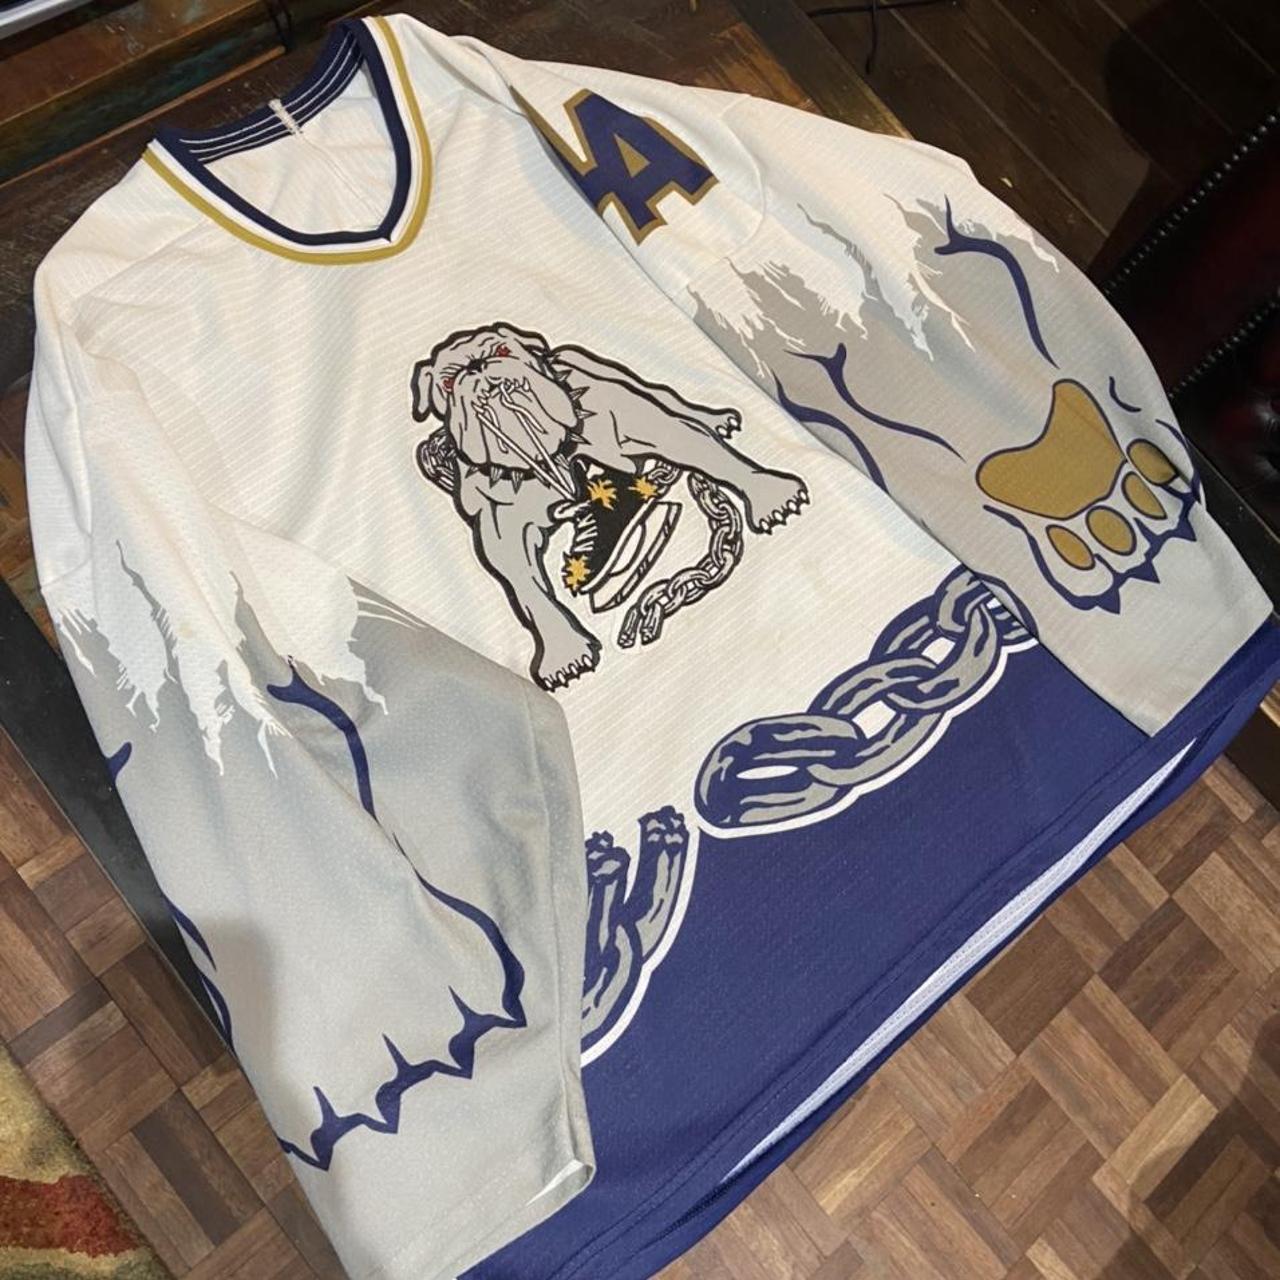 Long Beach Ice Dogs Authentic ECHL Jersey NWT